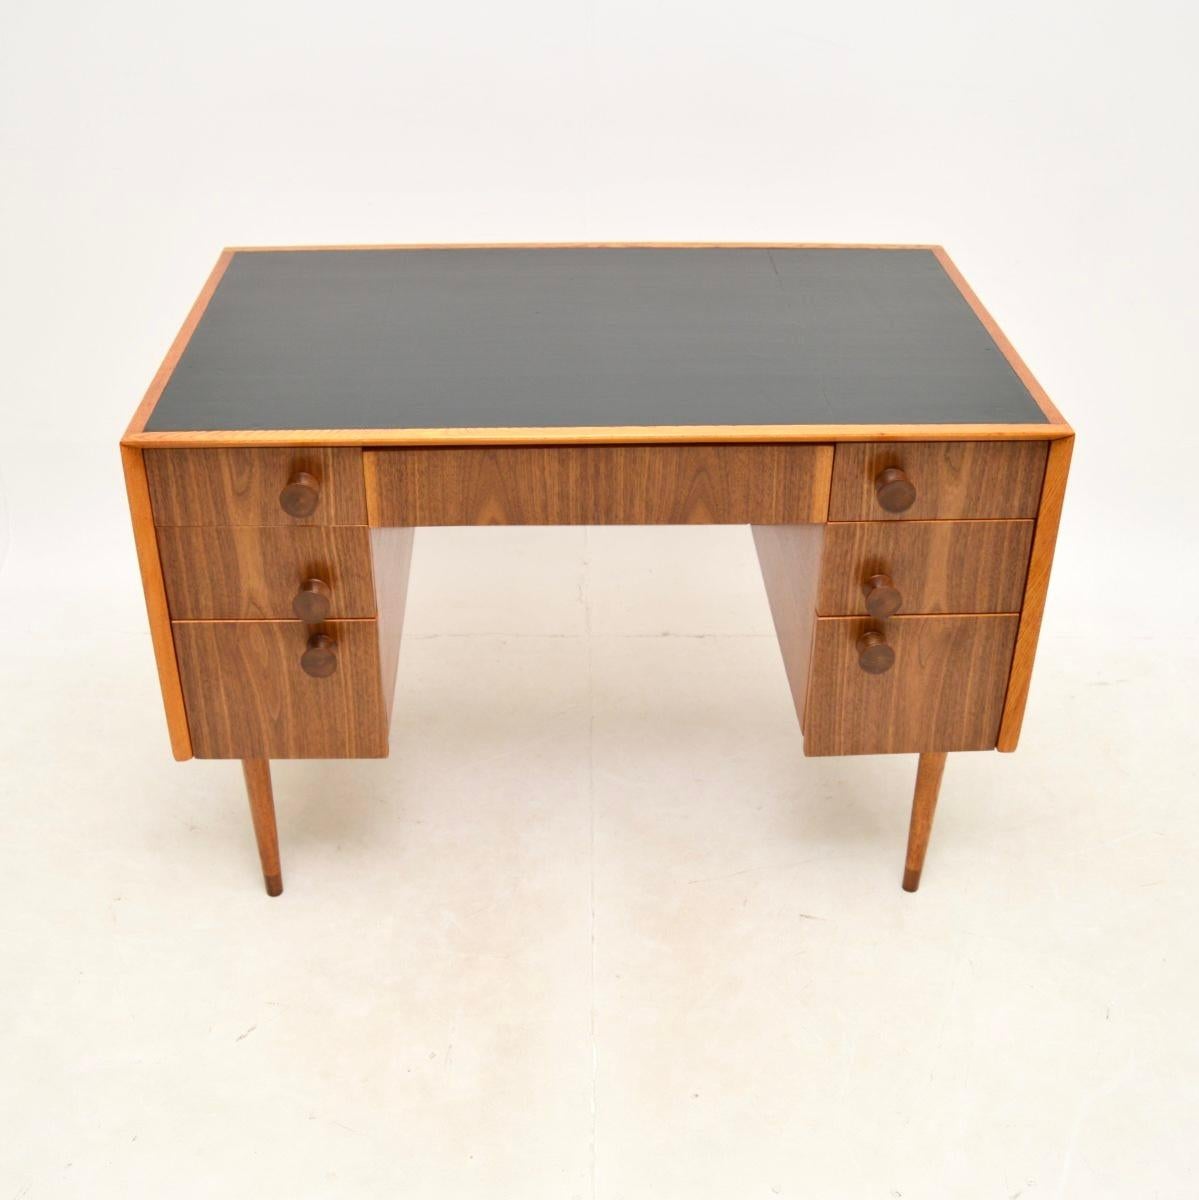 A very stylish and well made vintage walnut and oak leather top desk. This was made in England, it dates from around the 1950-60’s.

It is beautifully designed and is of superb quality, the oak carcass has exposed dovetailed joints at the top edges,